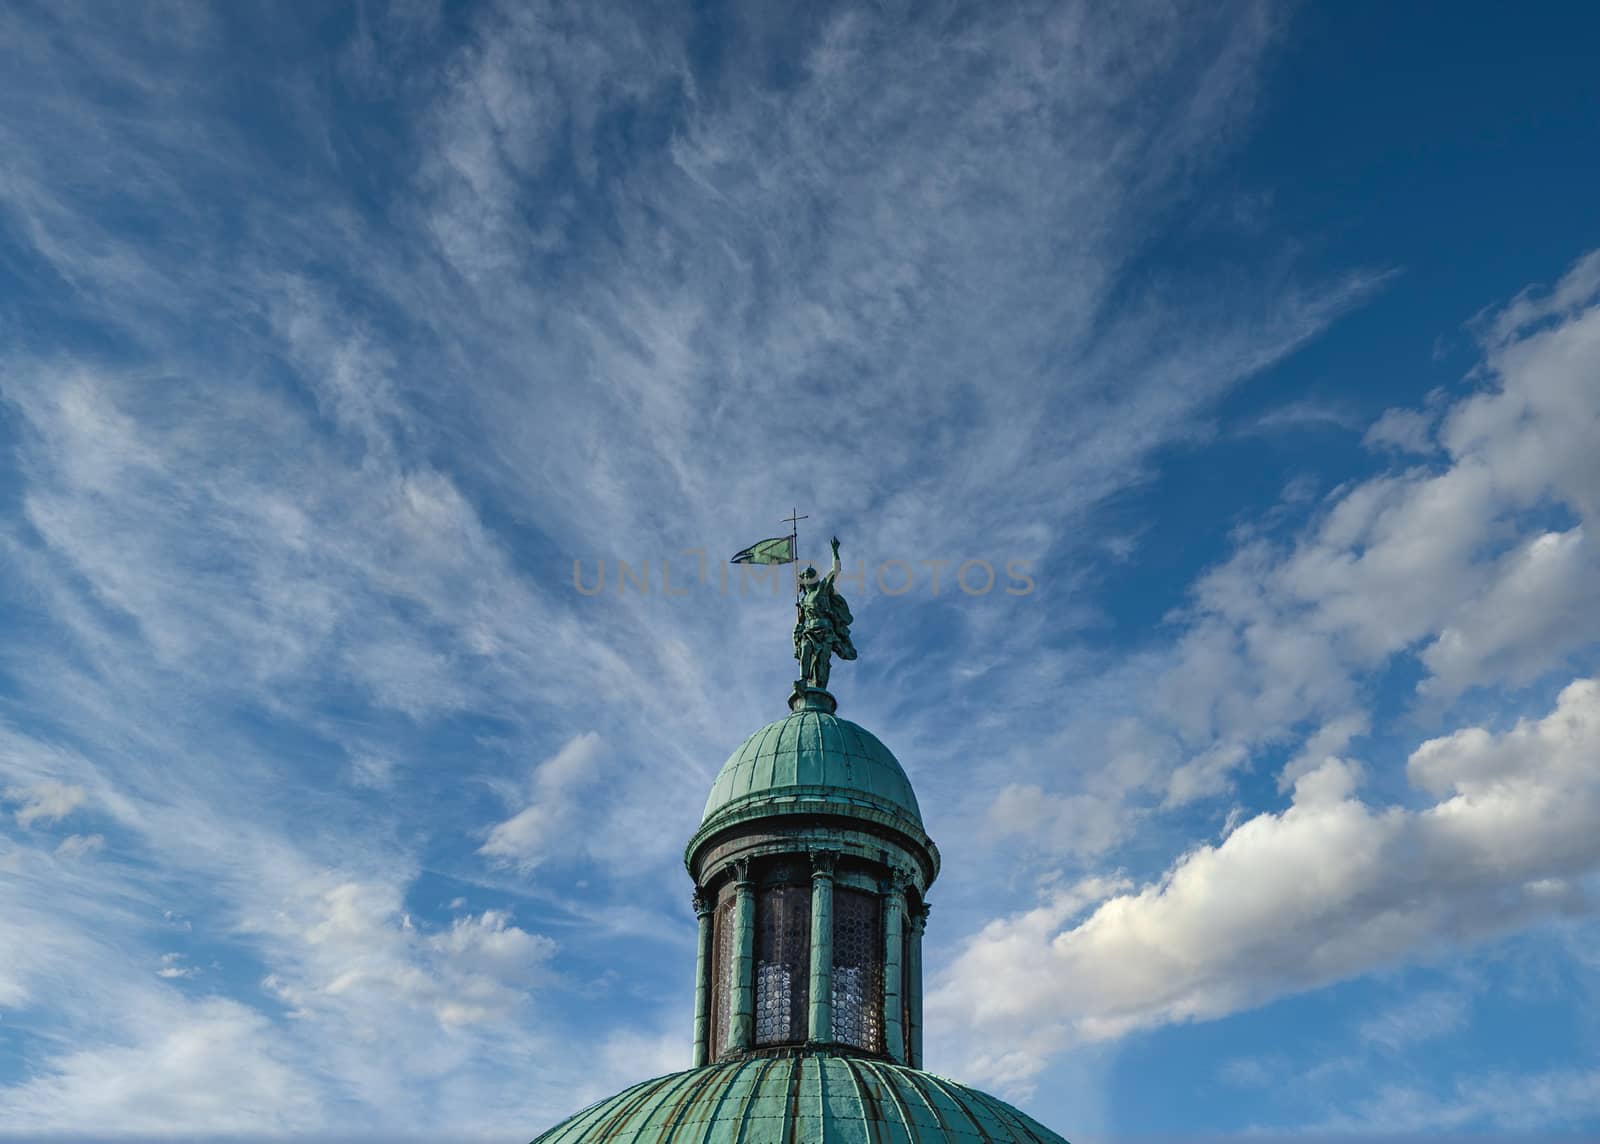 Statue on Green Cupola Against Sky by dbvirago